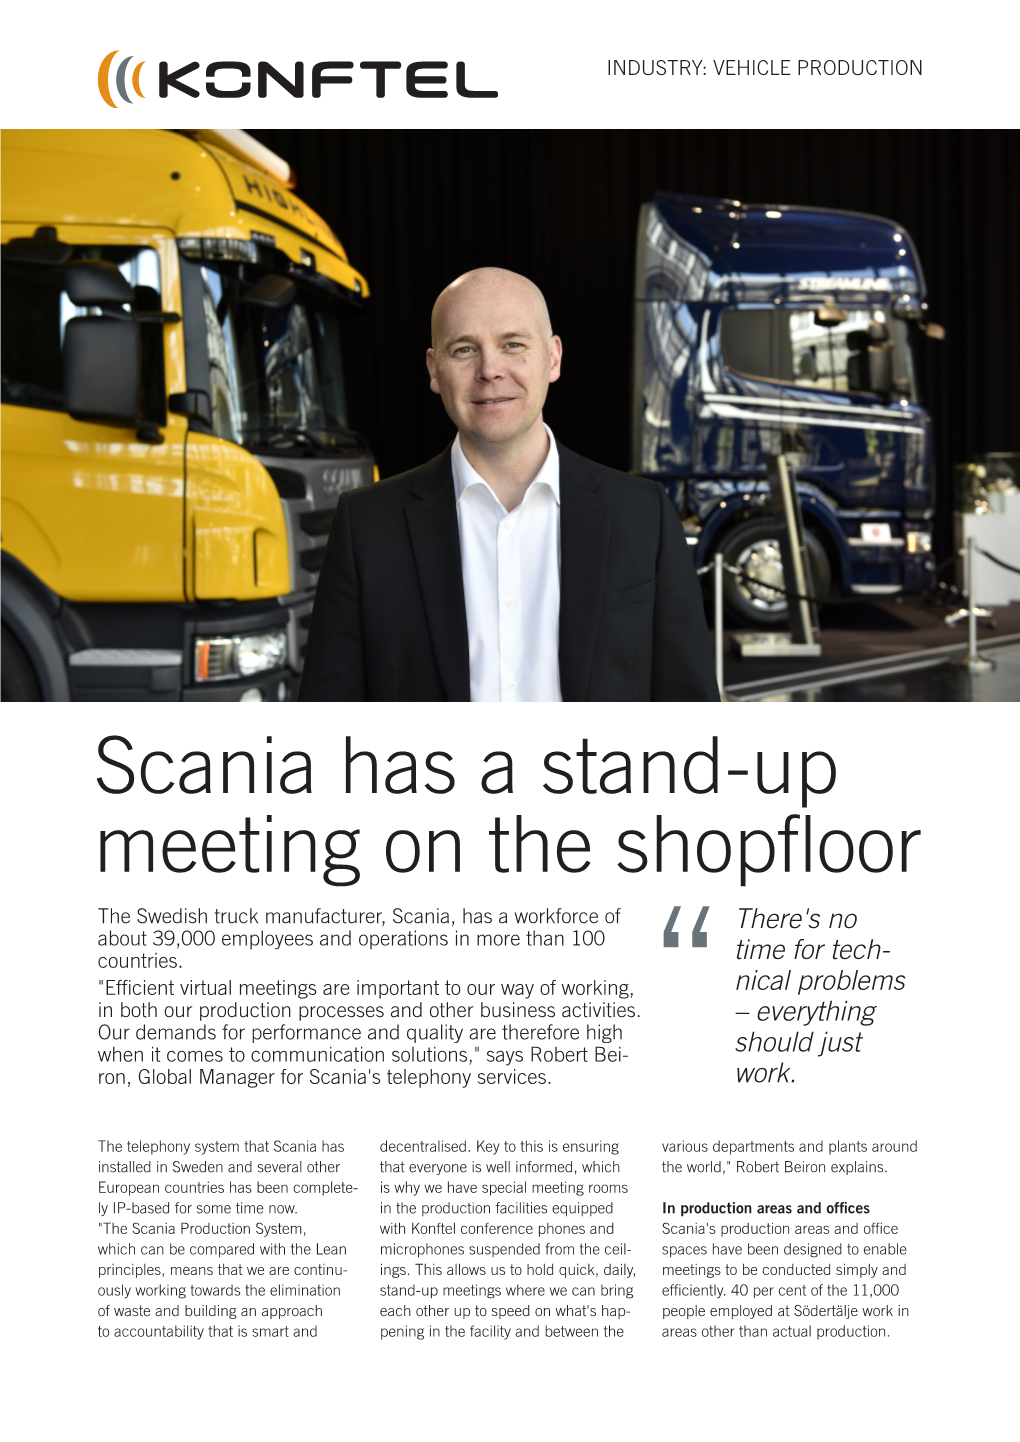 Scania Has a Stand-Up Meeting on the Shopfloor